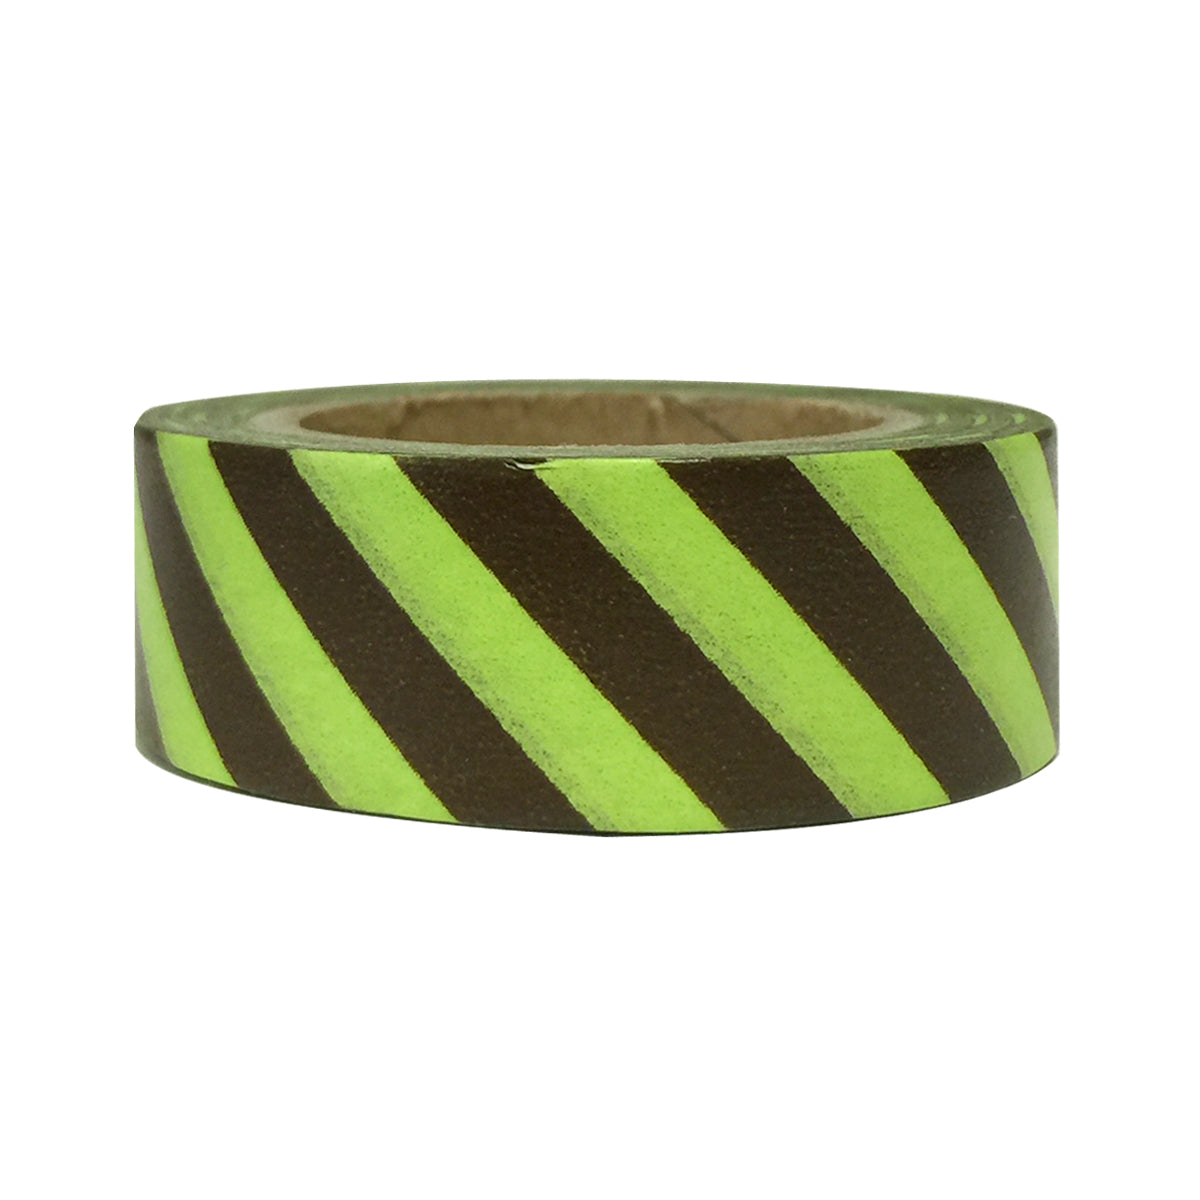 Wrapables Washi Masking Tape, Green and Gold Group